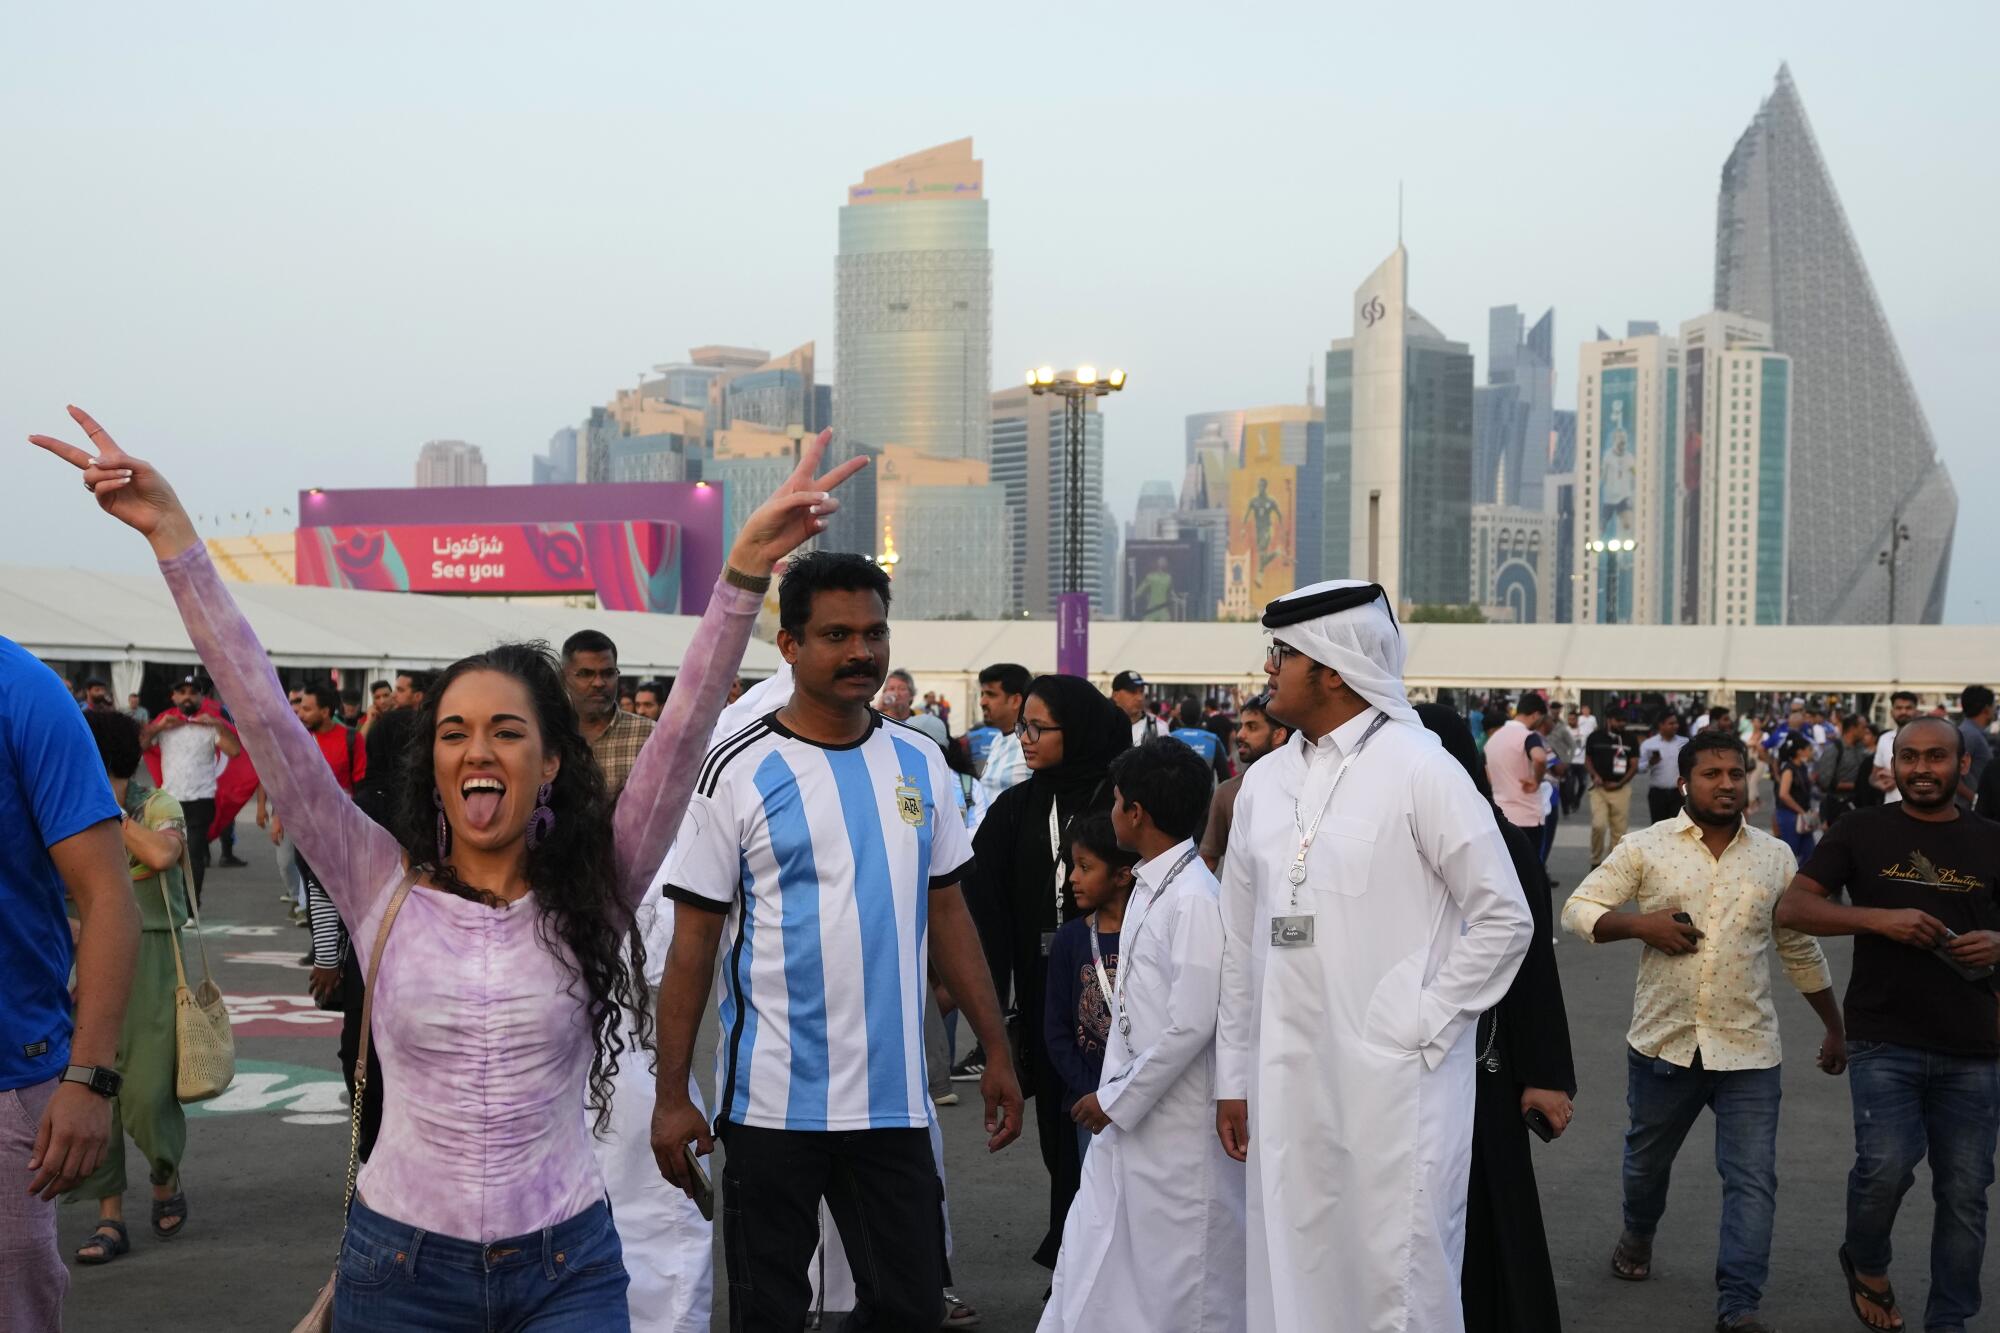 People attend a fan event for the World Cup in Doha, Qatar.